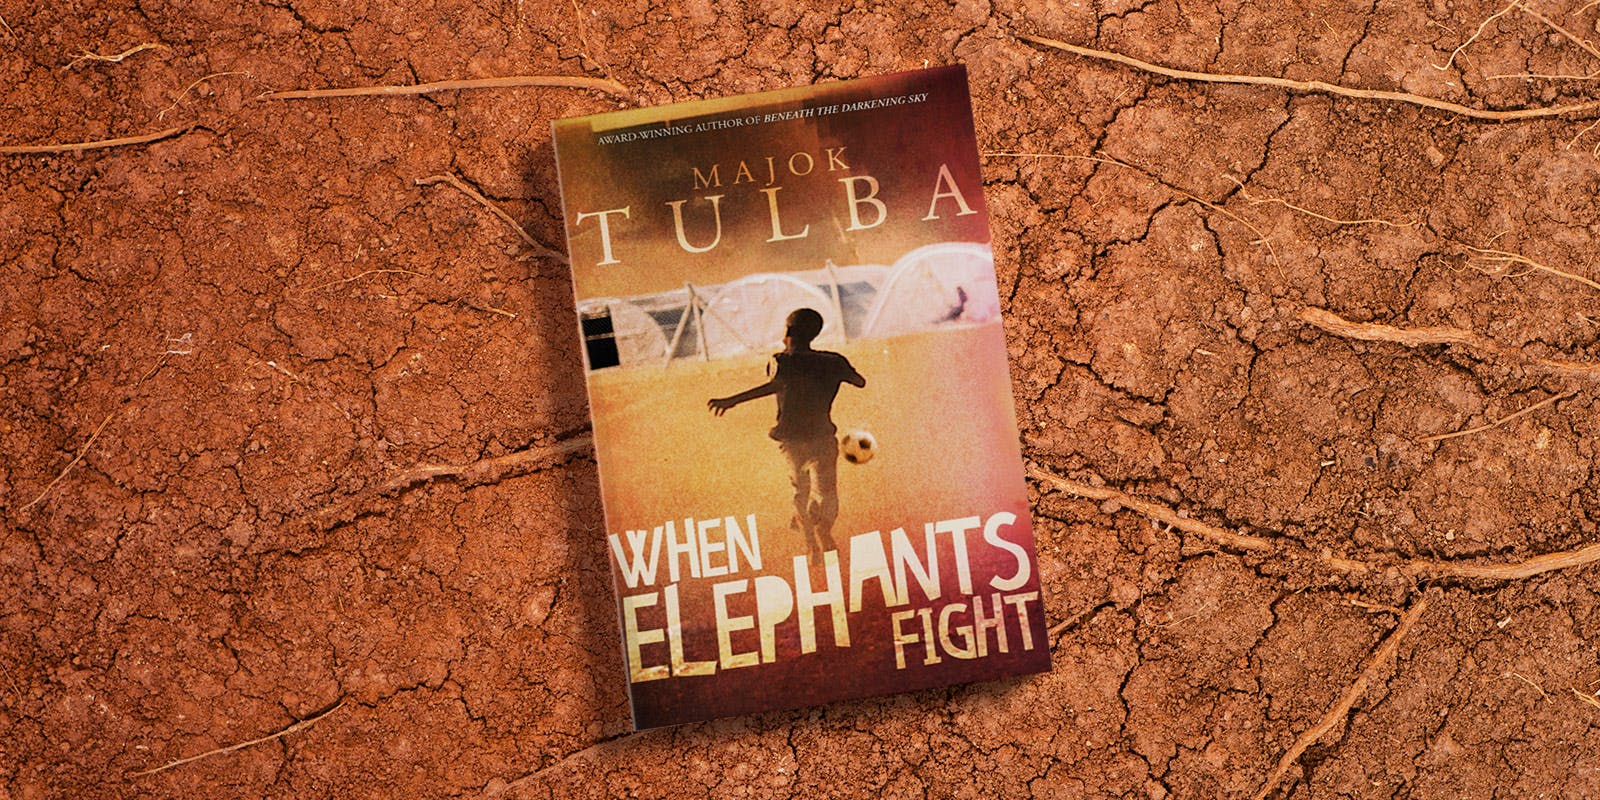 When Elephants Fight book club notes